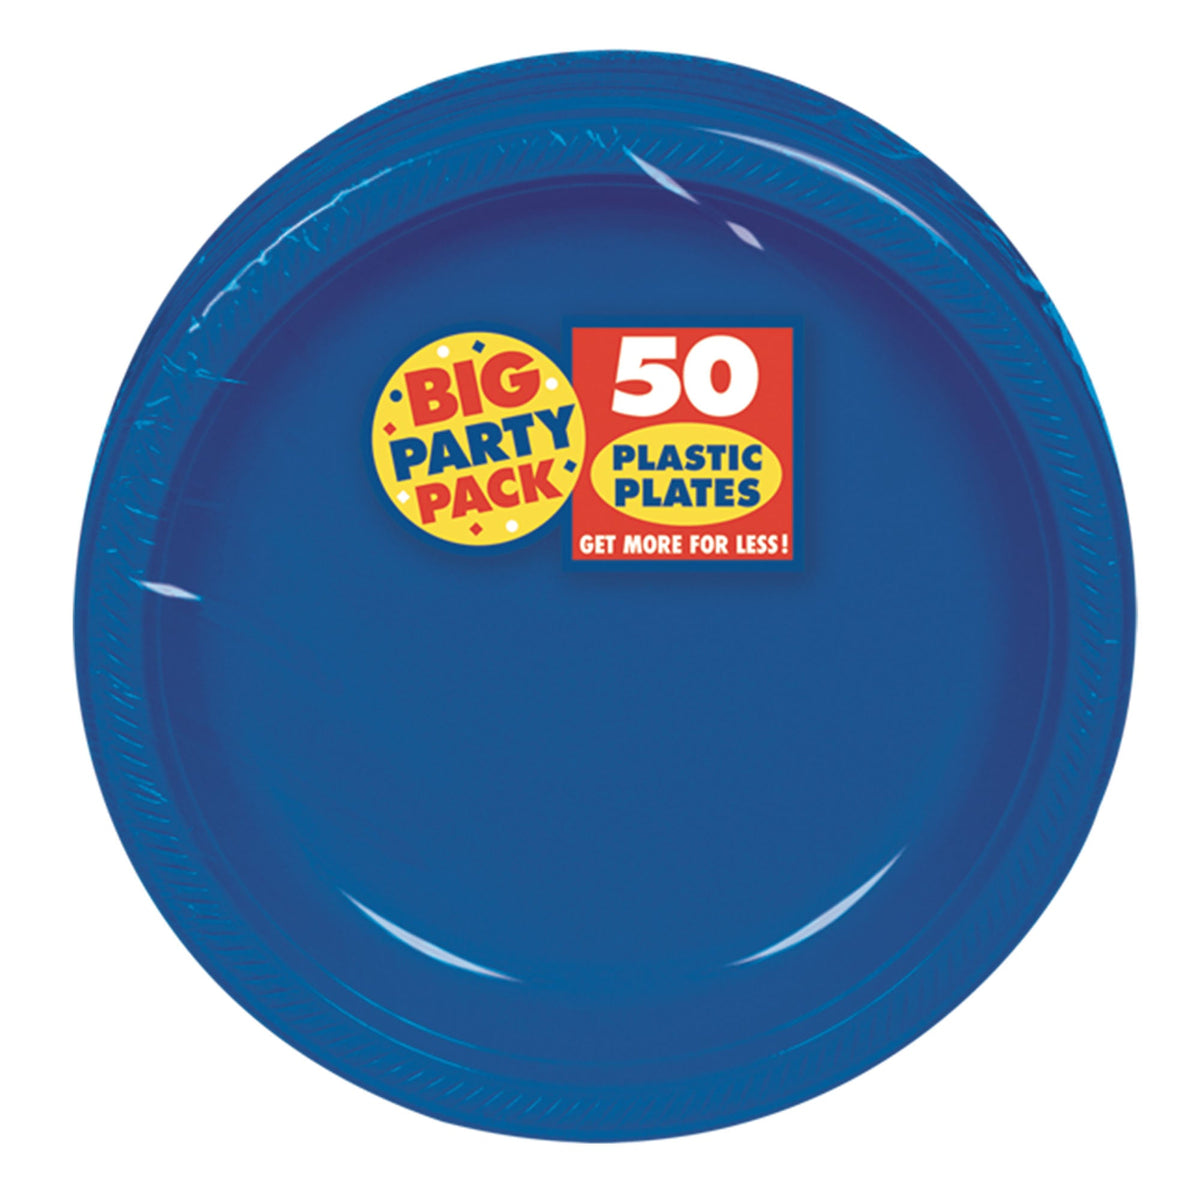 Royal Blue 7" Round Plastic Plates, 50 count